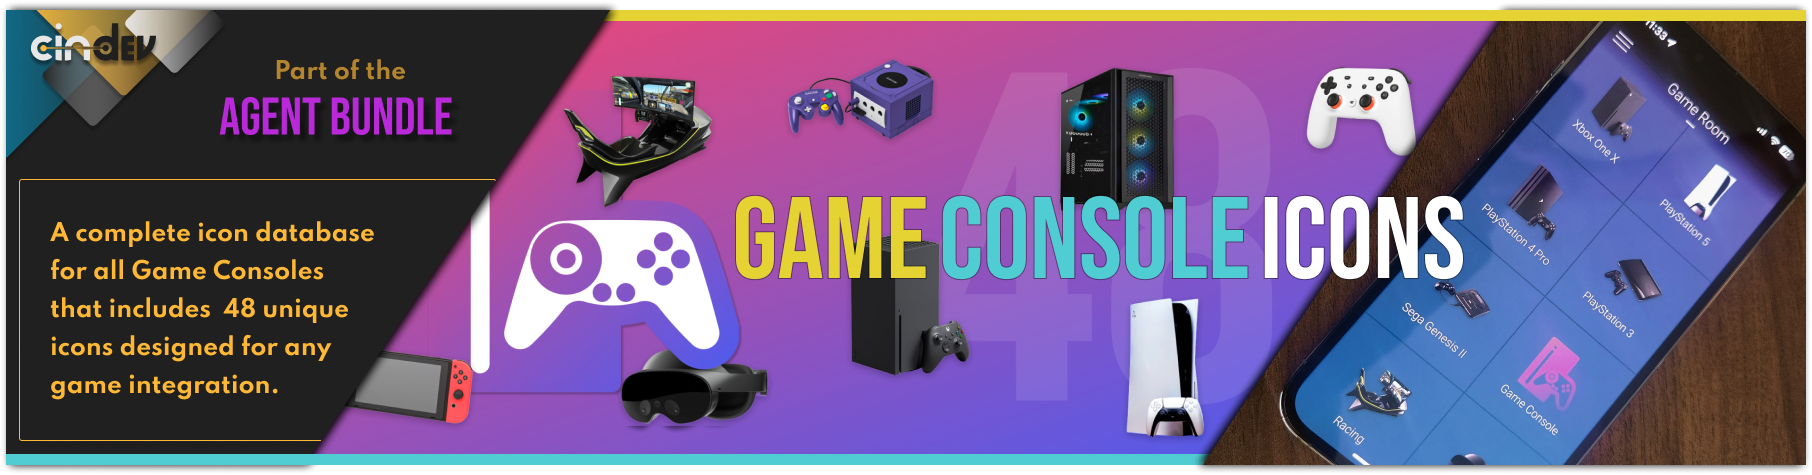 Game_Console_Icons_Banner